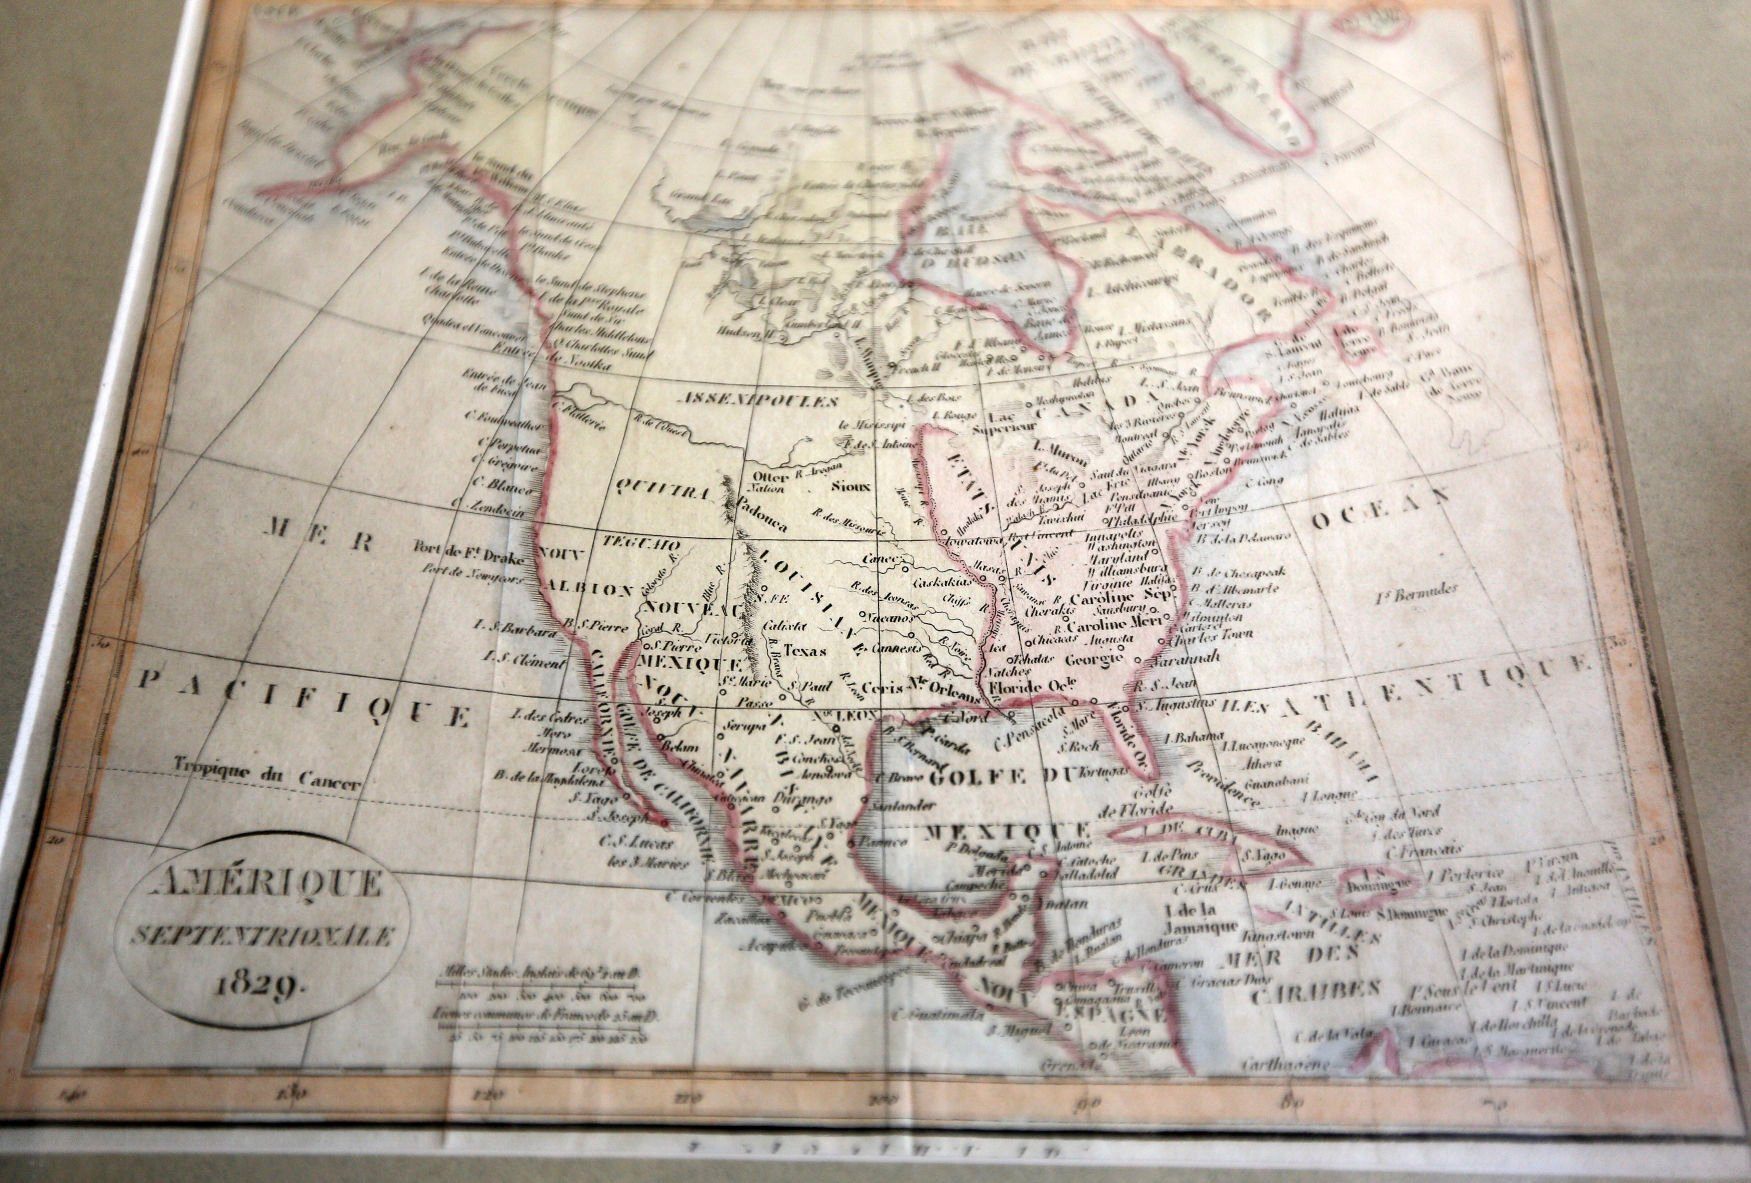 A map of the United States of America printed in 1829 for sale at Rix Antiques in Galena, Ill.    PHOTO CREDIT: Dave Kettering